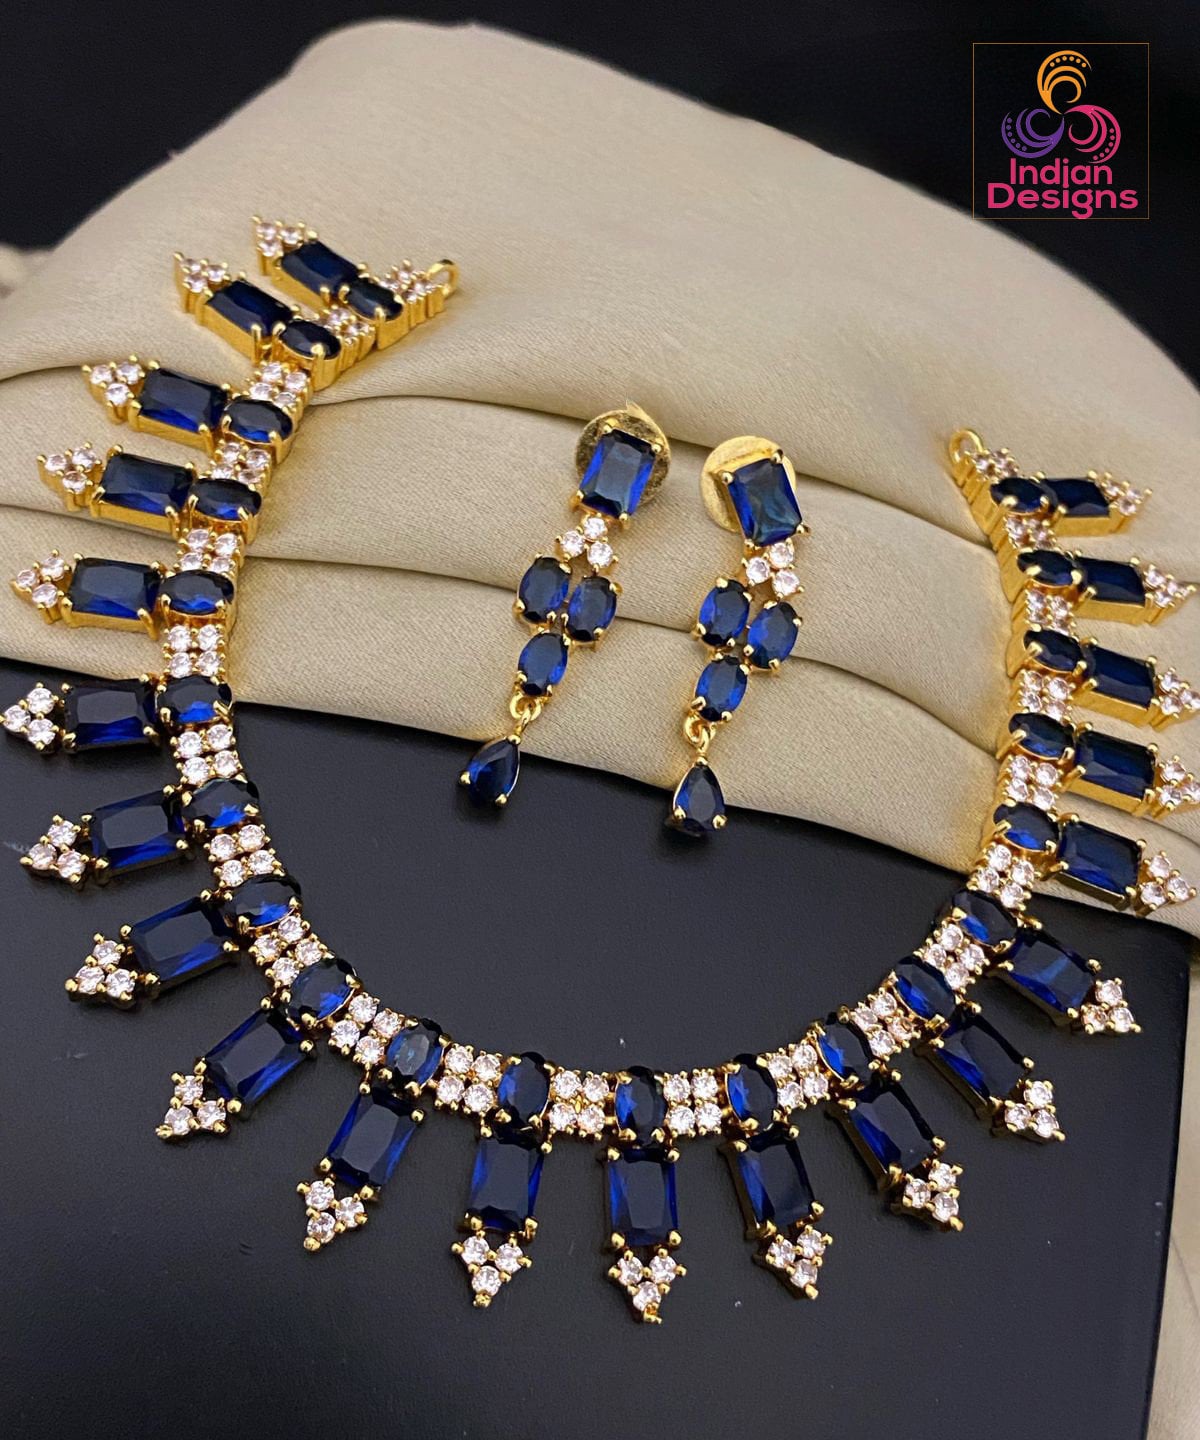 Gold plated Cz American Diamond ruby, Emerald and Blue Sapphire stones necklace earrings Indian Jewelry | AD stones Simple gold choker set